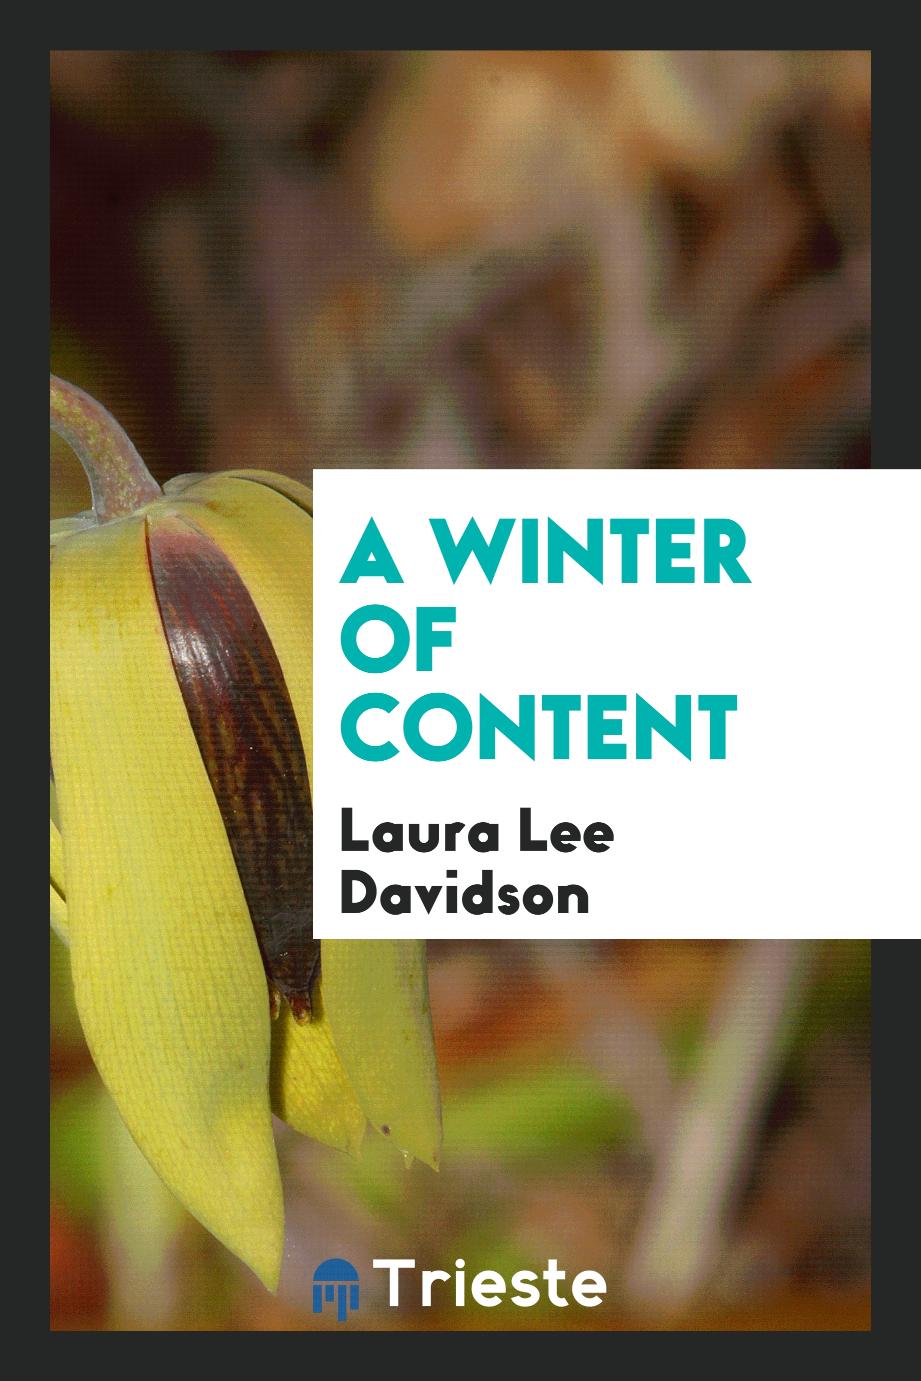 A winter of content